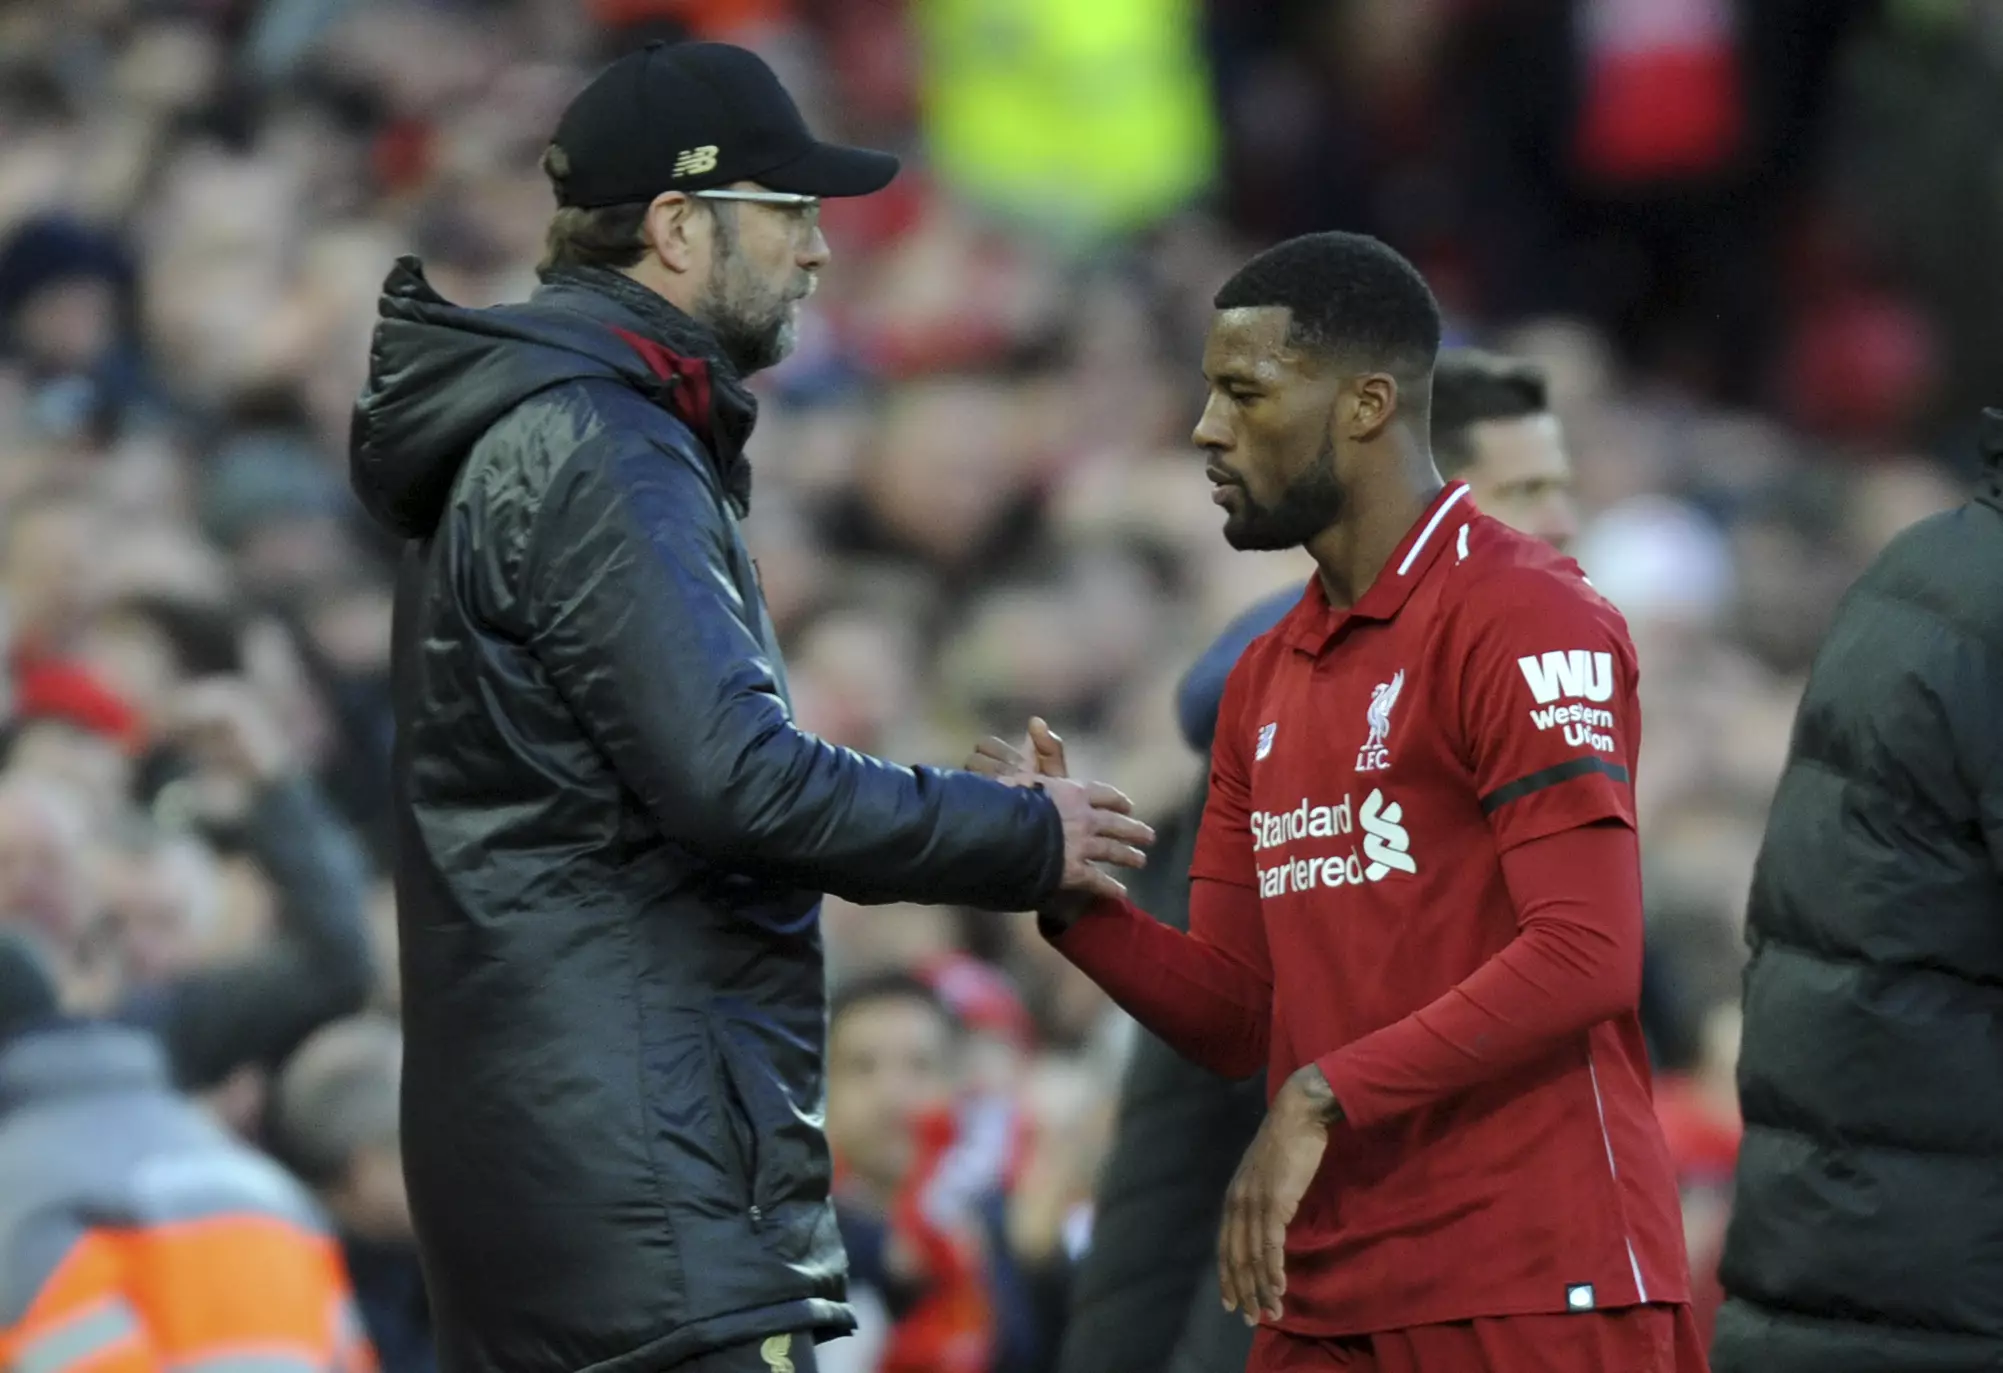 Wijnaldum looks set to stay at Liverpool. Image: PA Images